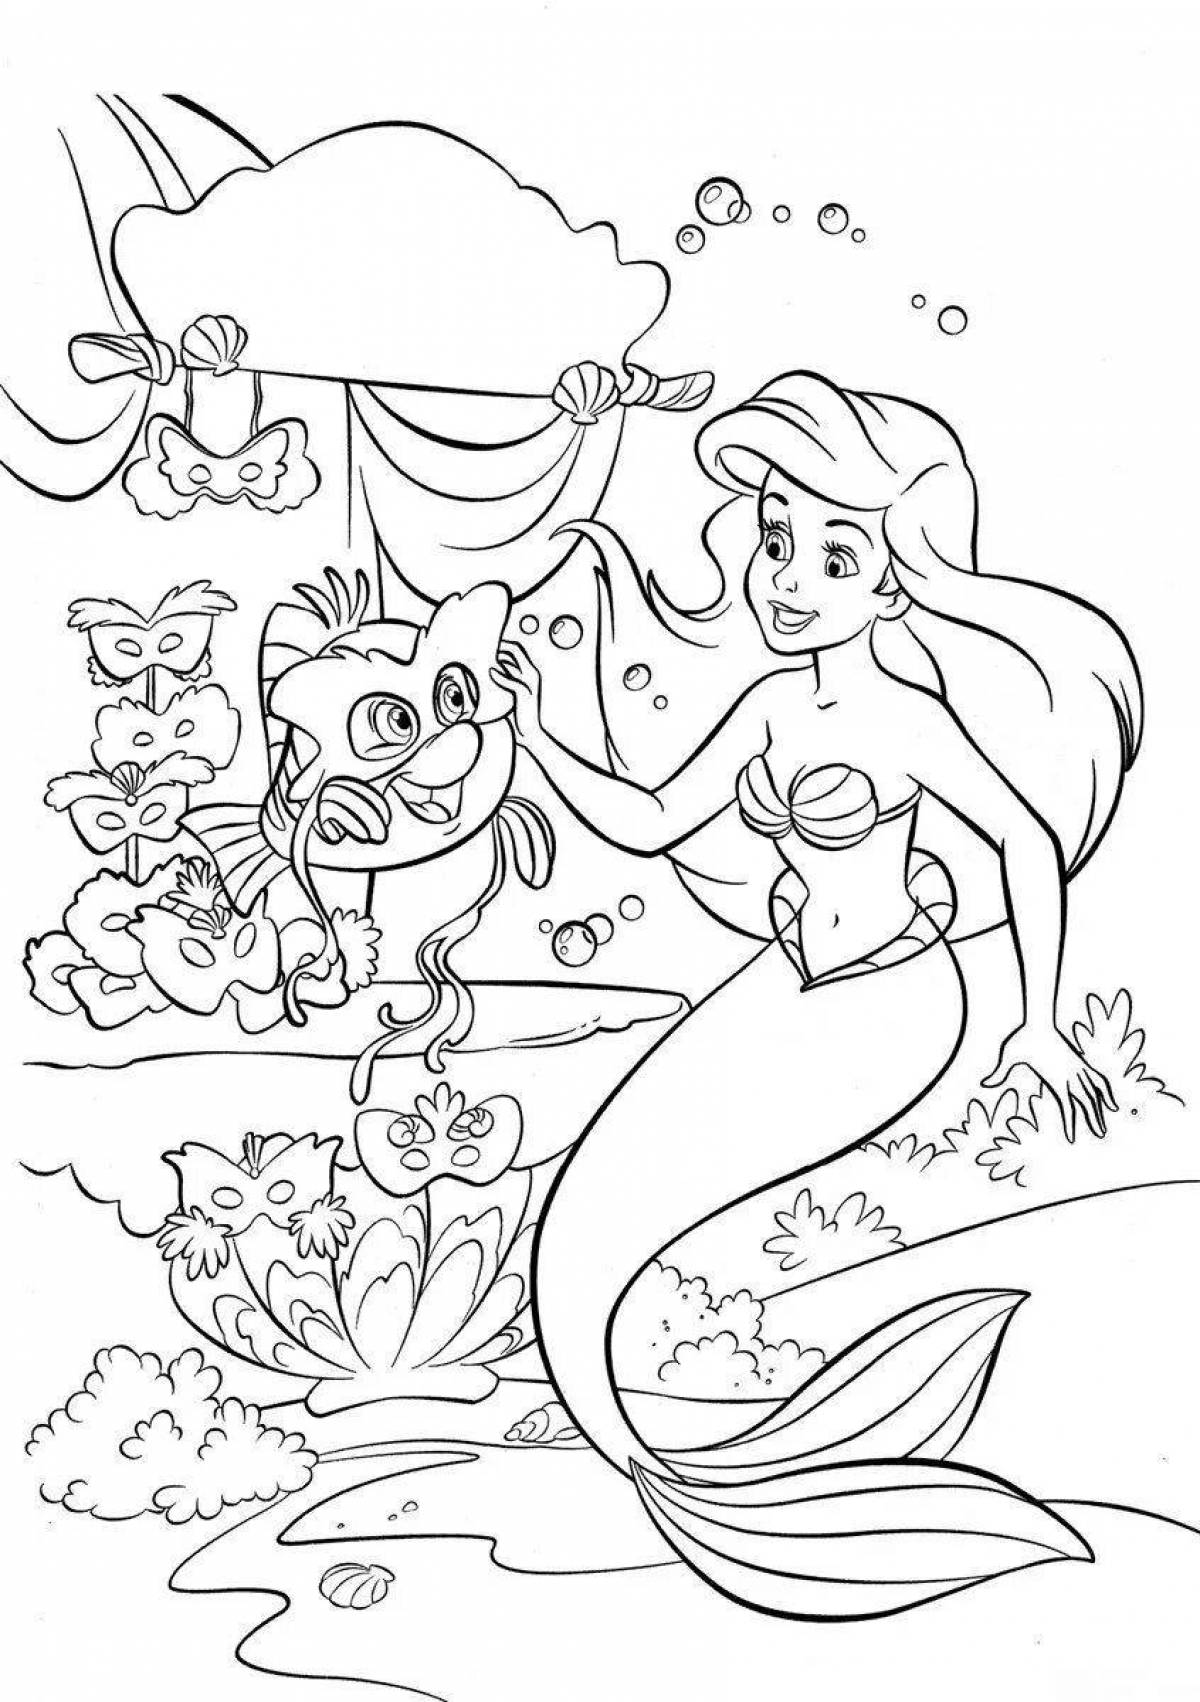 Ariel the little mermaid glitter coloring book for kids